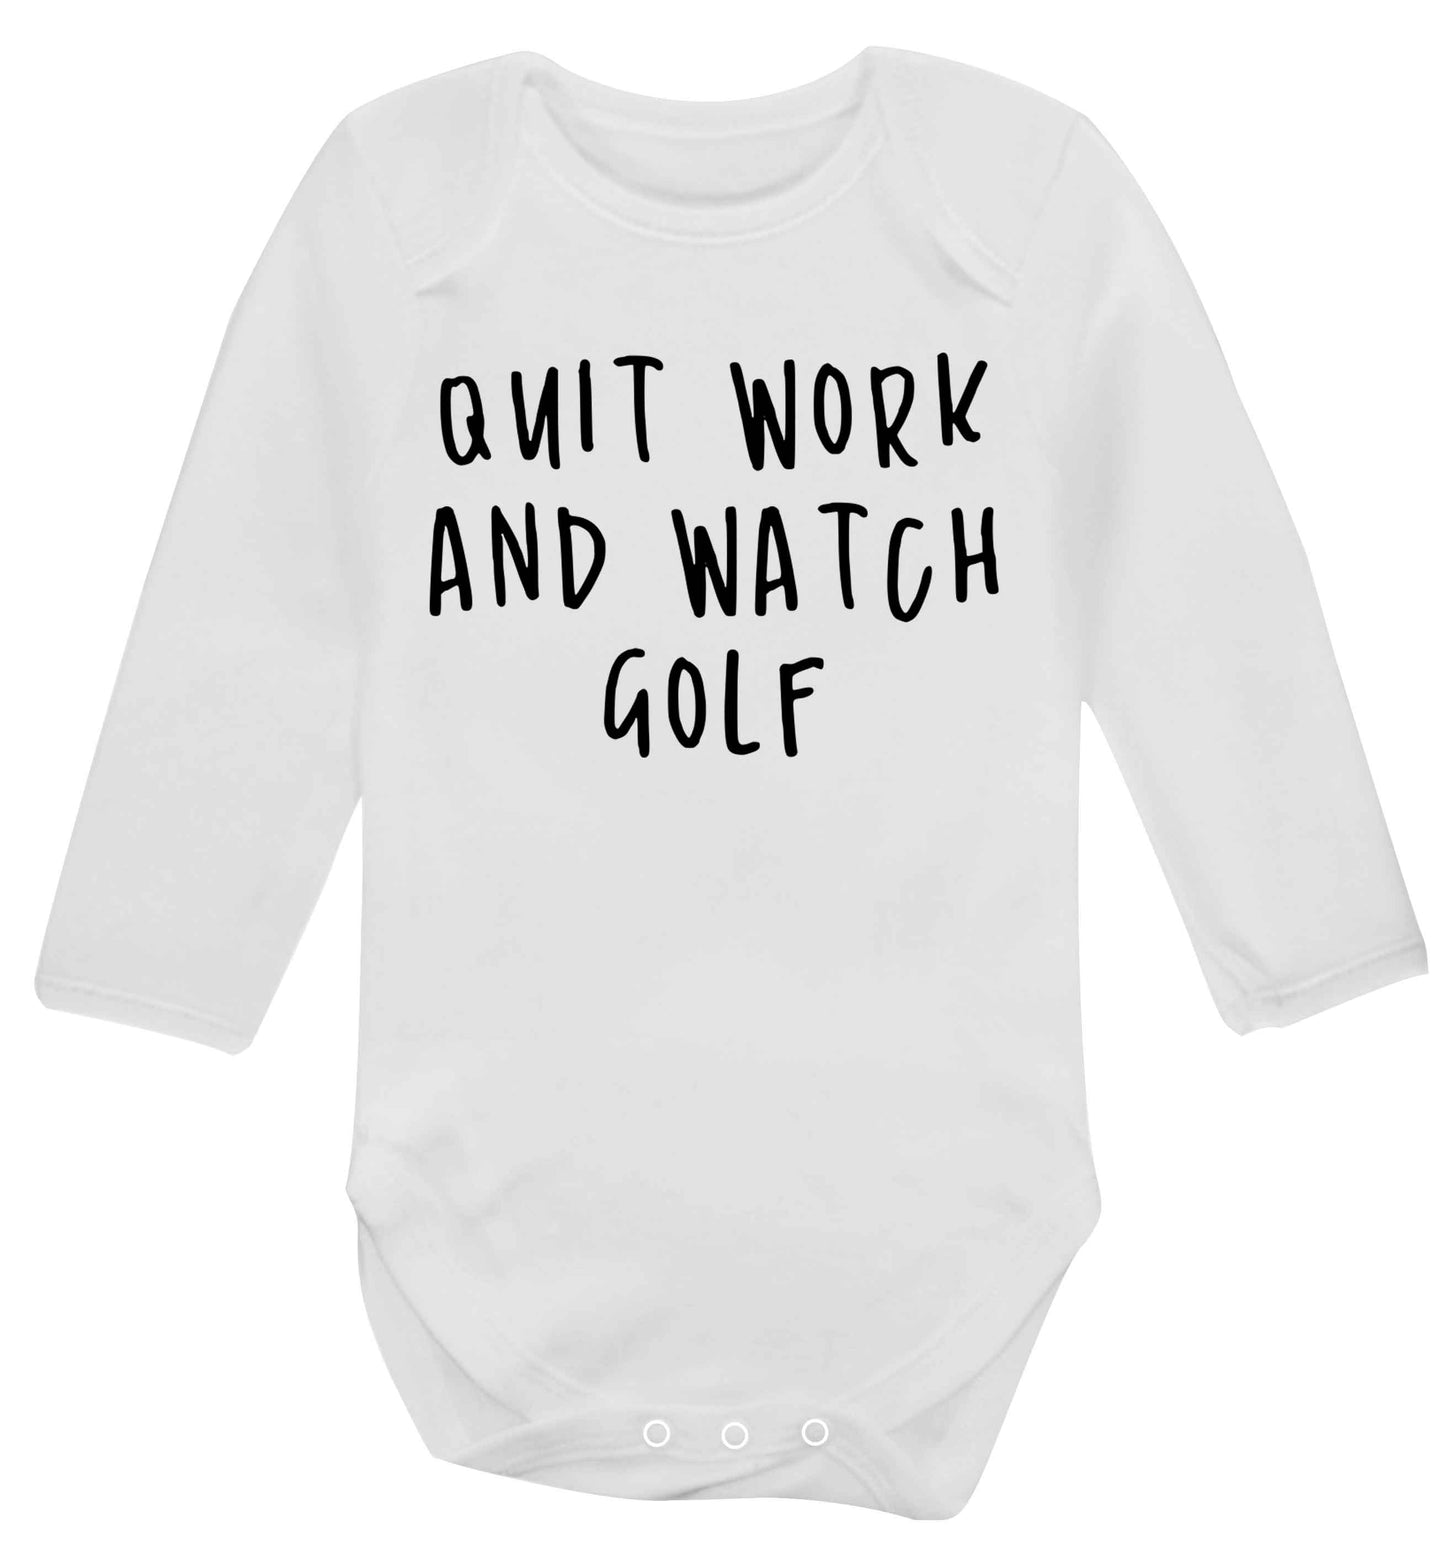 Quit work and watch golf Baby Vest long sleeved white 6-12 months